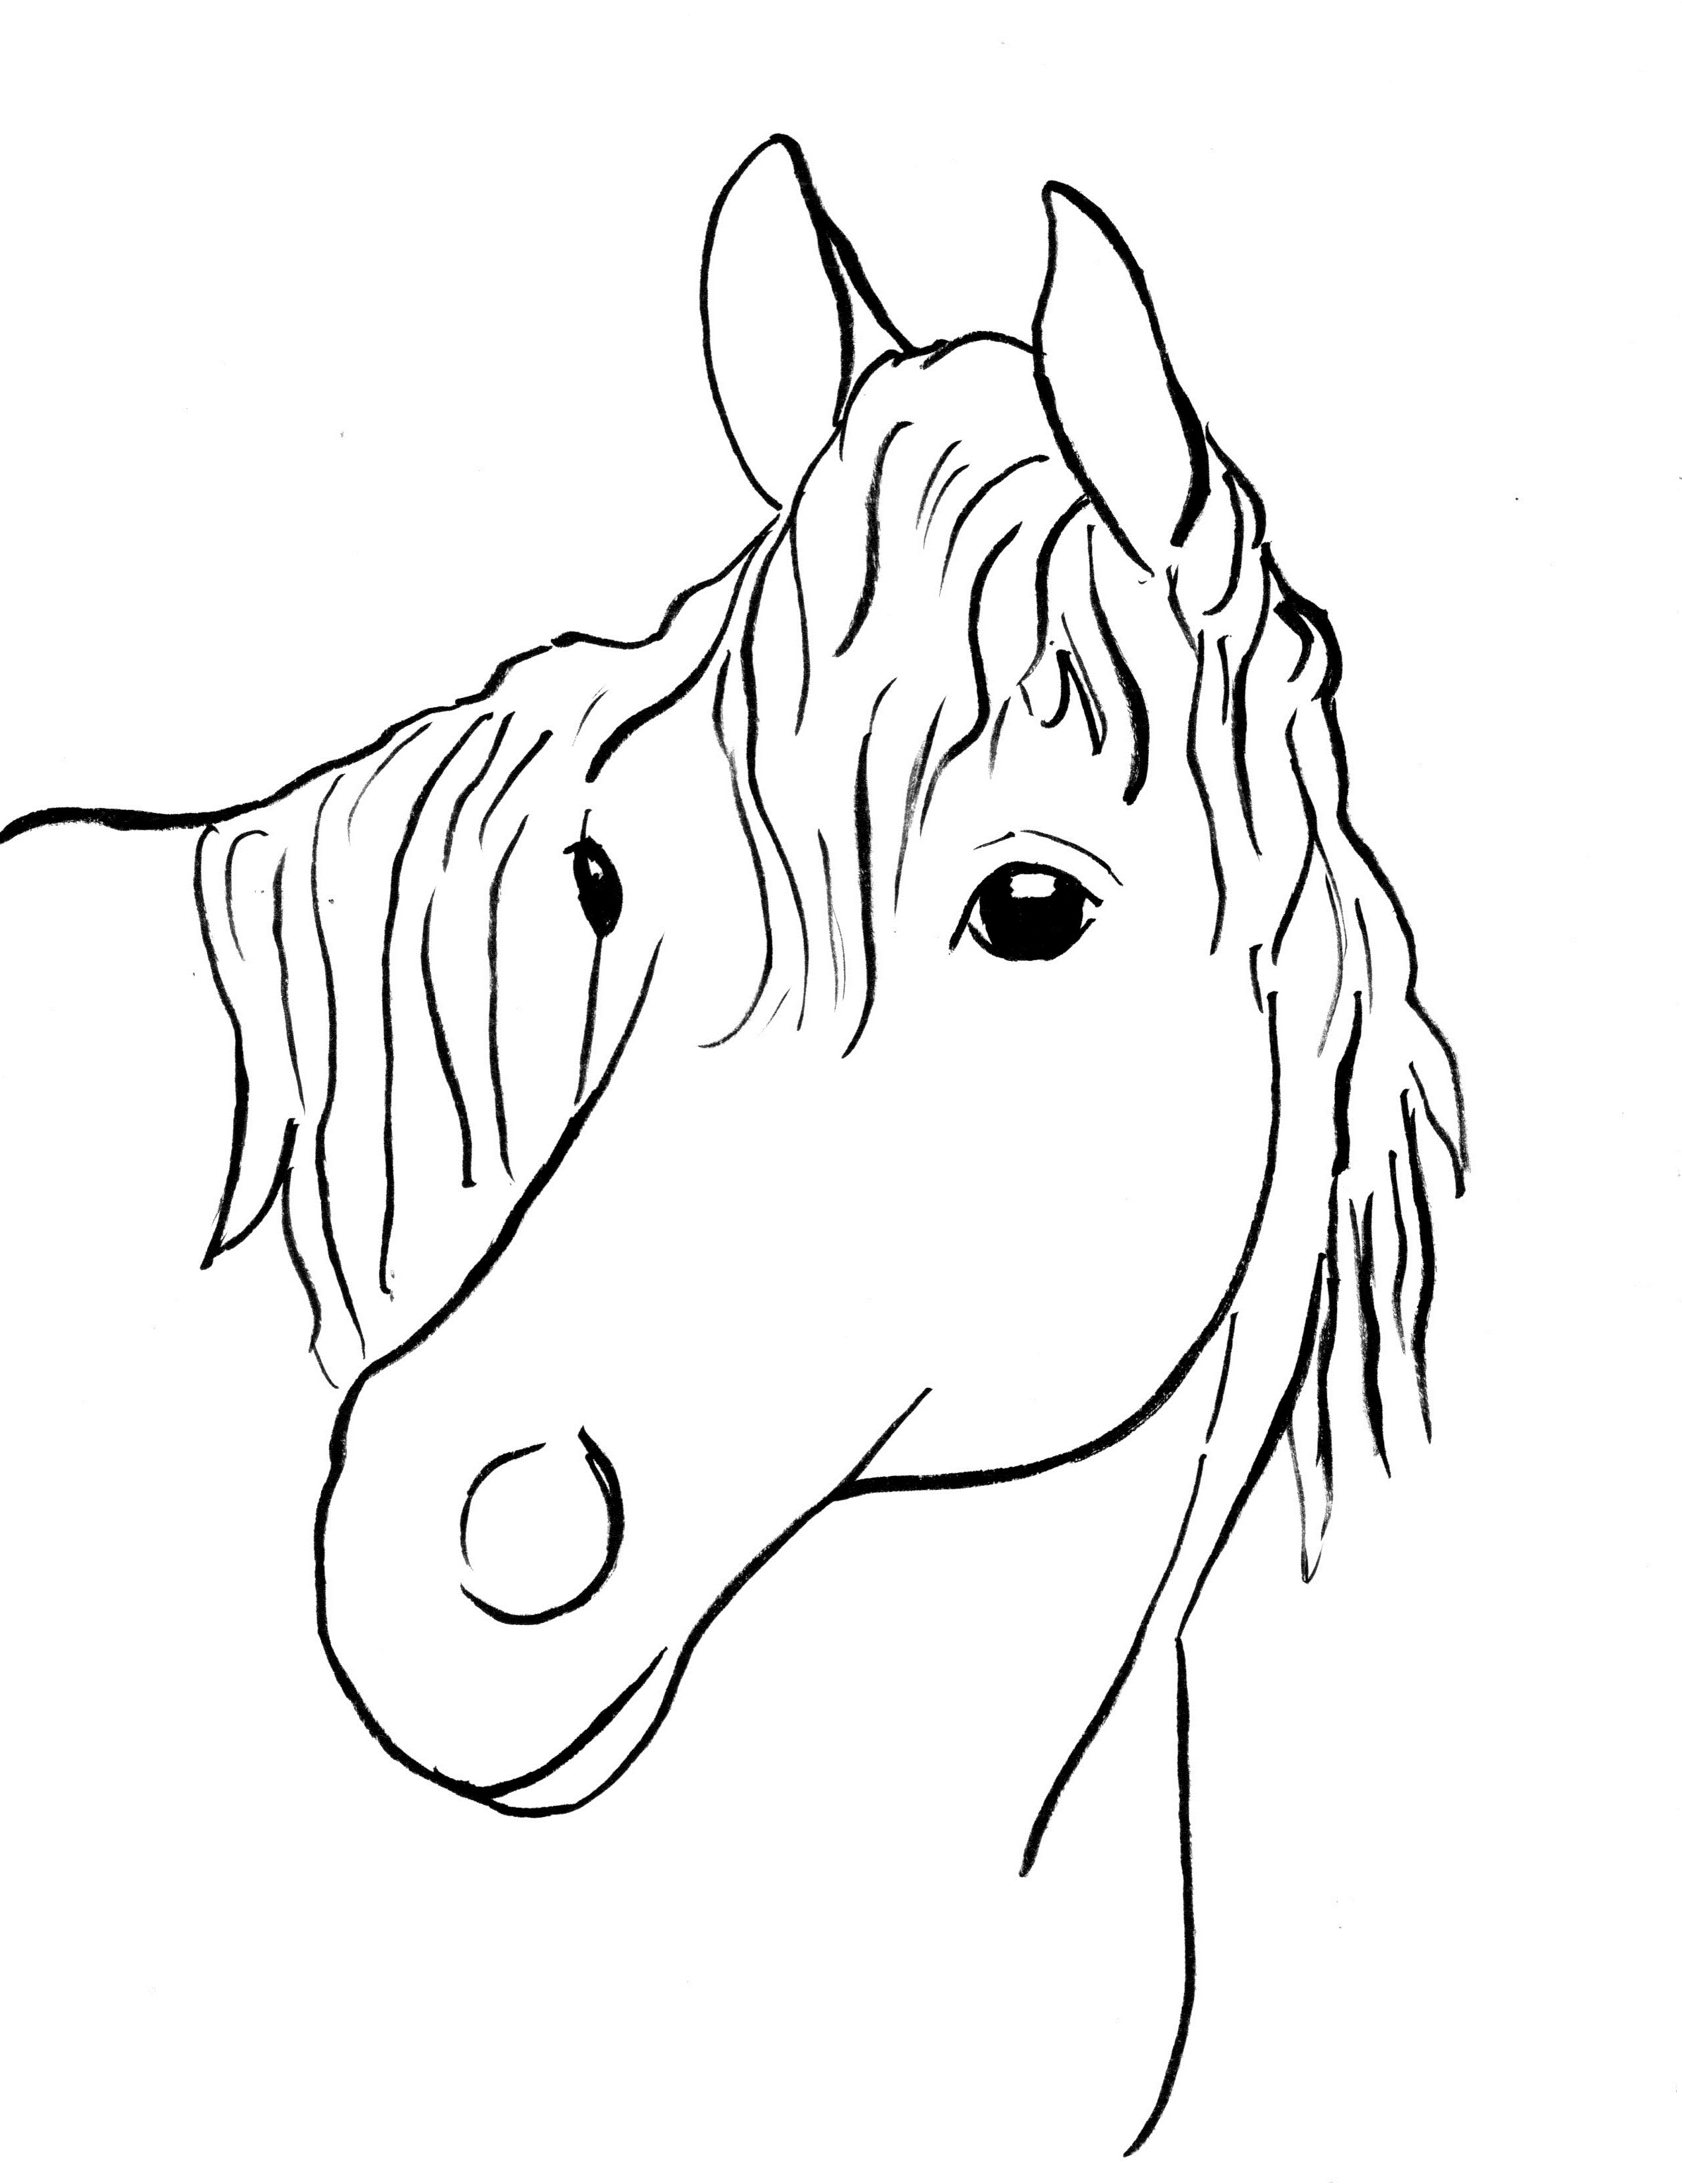 coloring-pages-of-horses-printable-home-design-ideas